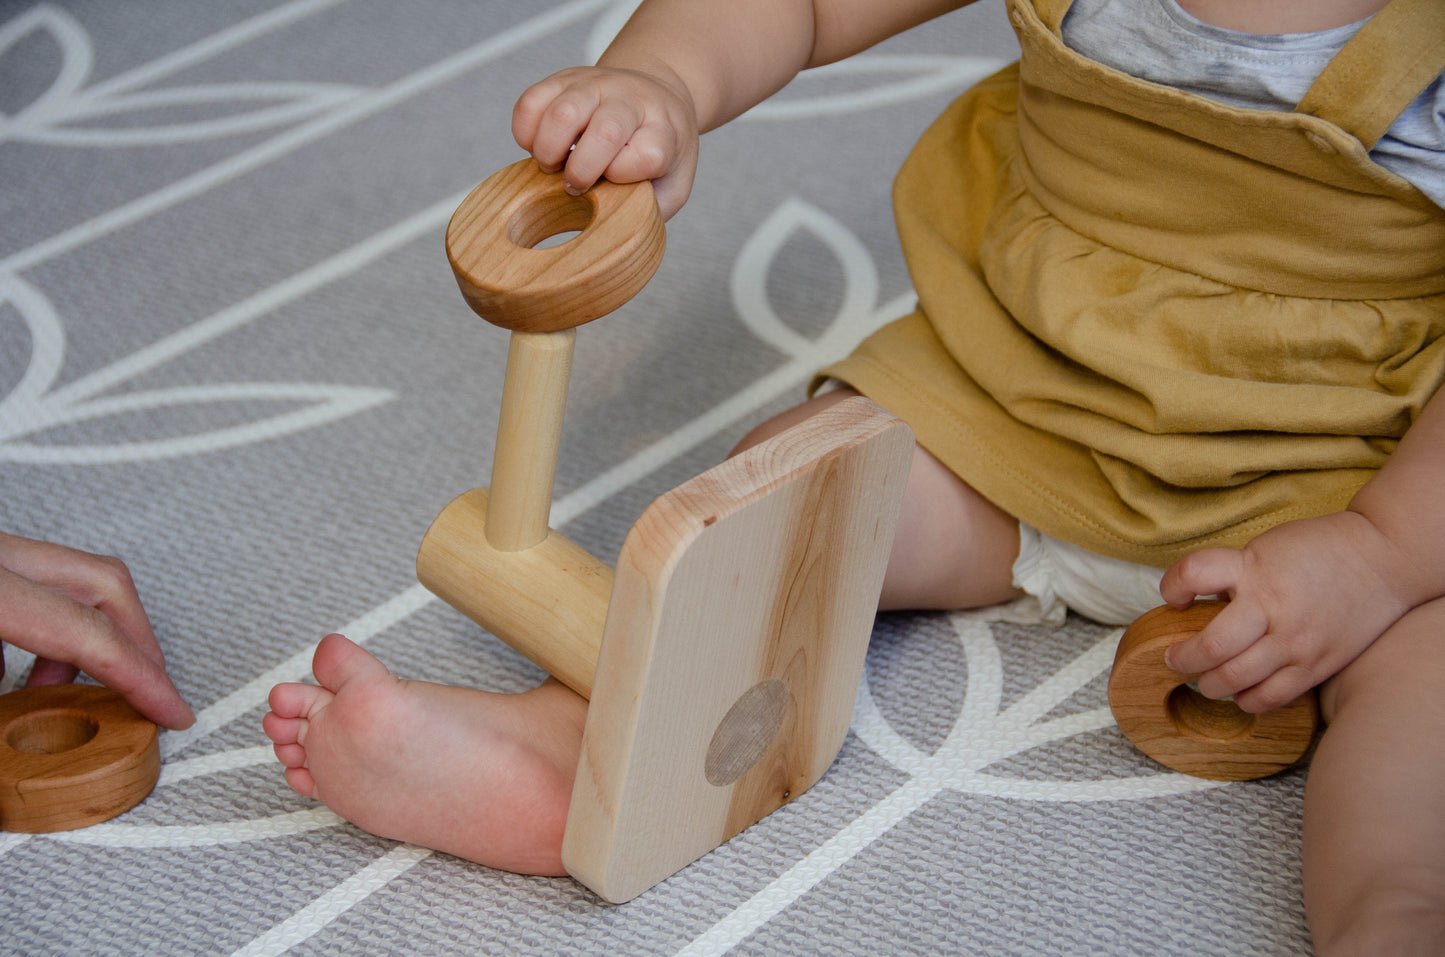 Baby girl happily engaged with the natural wooden Horizontal Dowel Rings Stacker, enjoying the tactile experience as she explores the rings and practices her coordination skills during playtime.